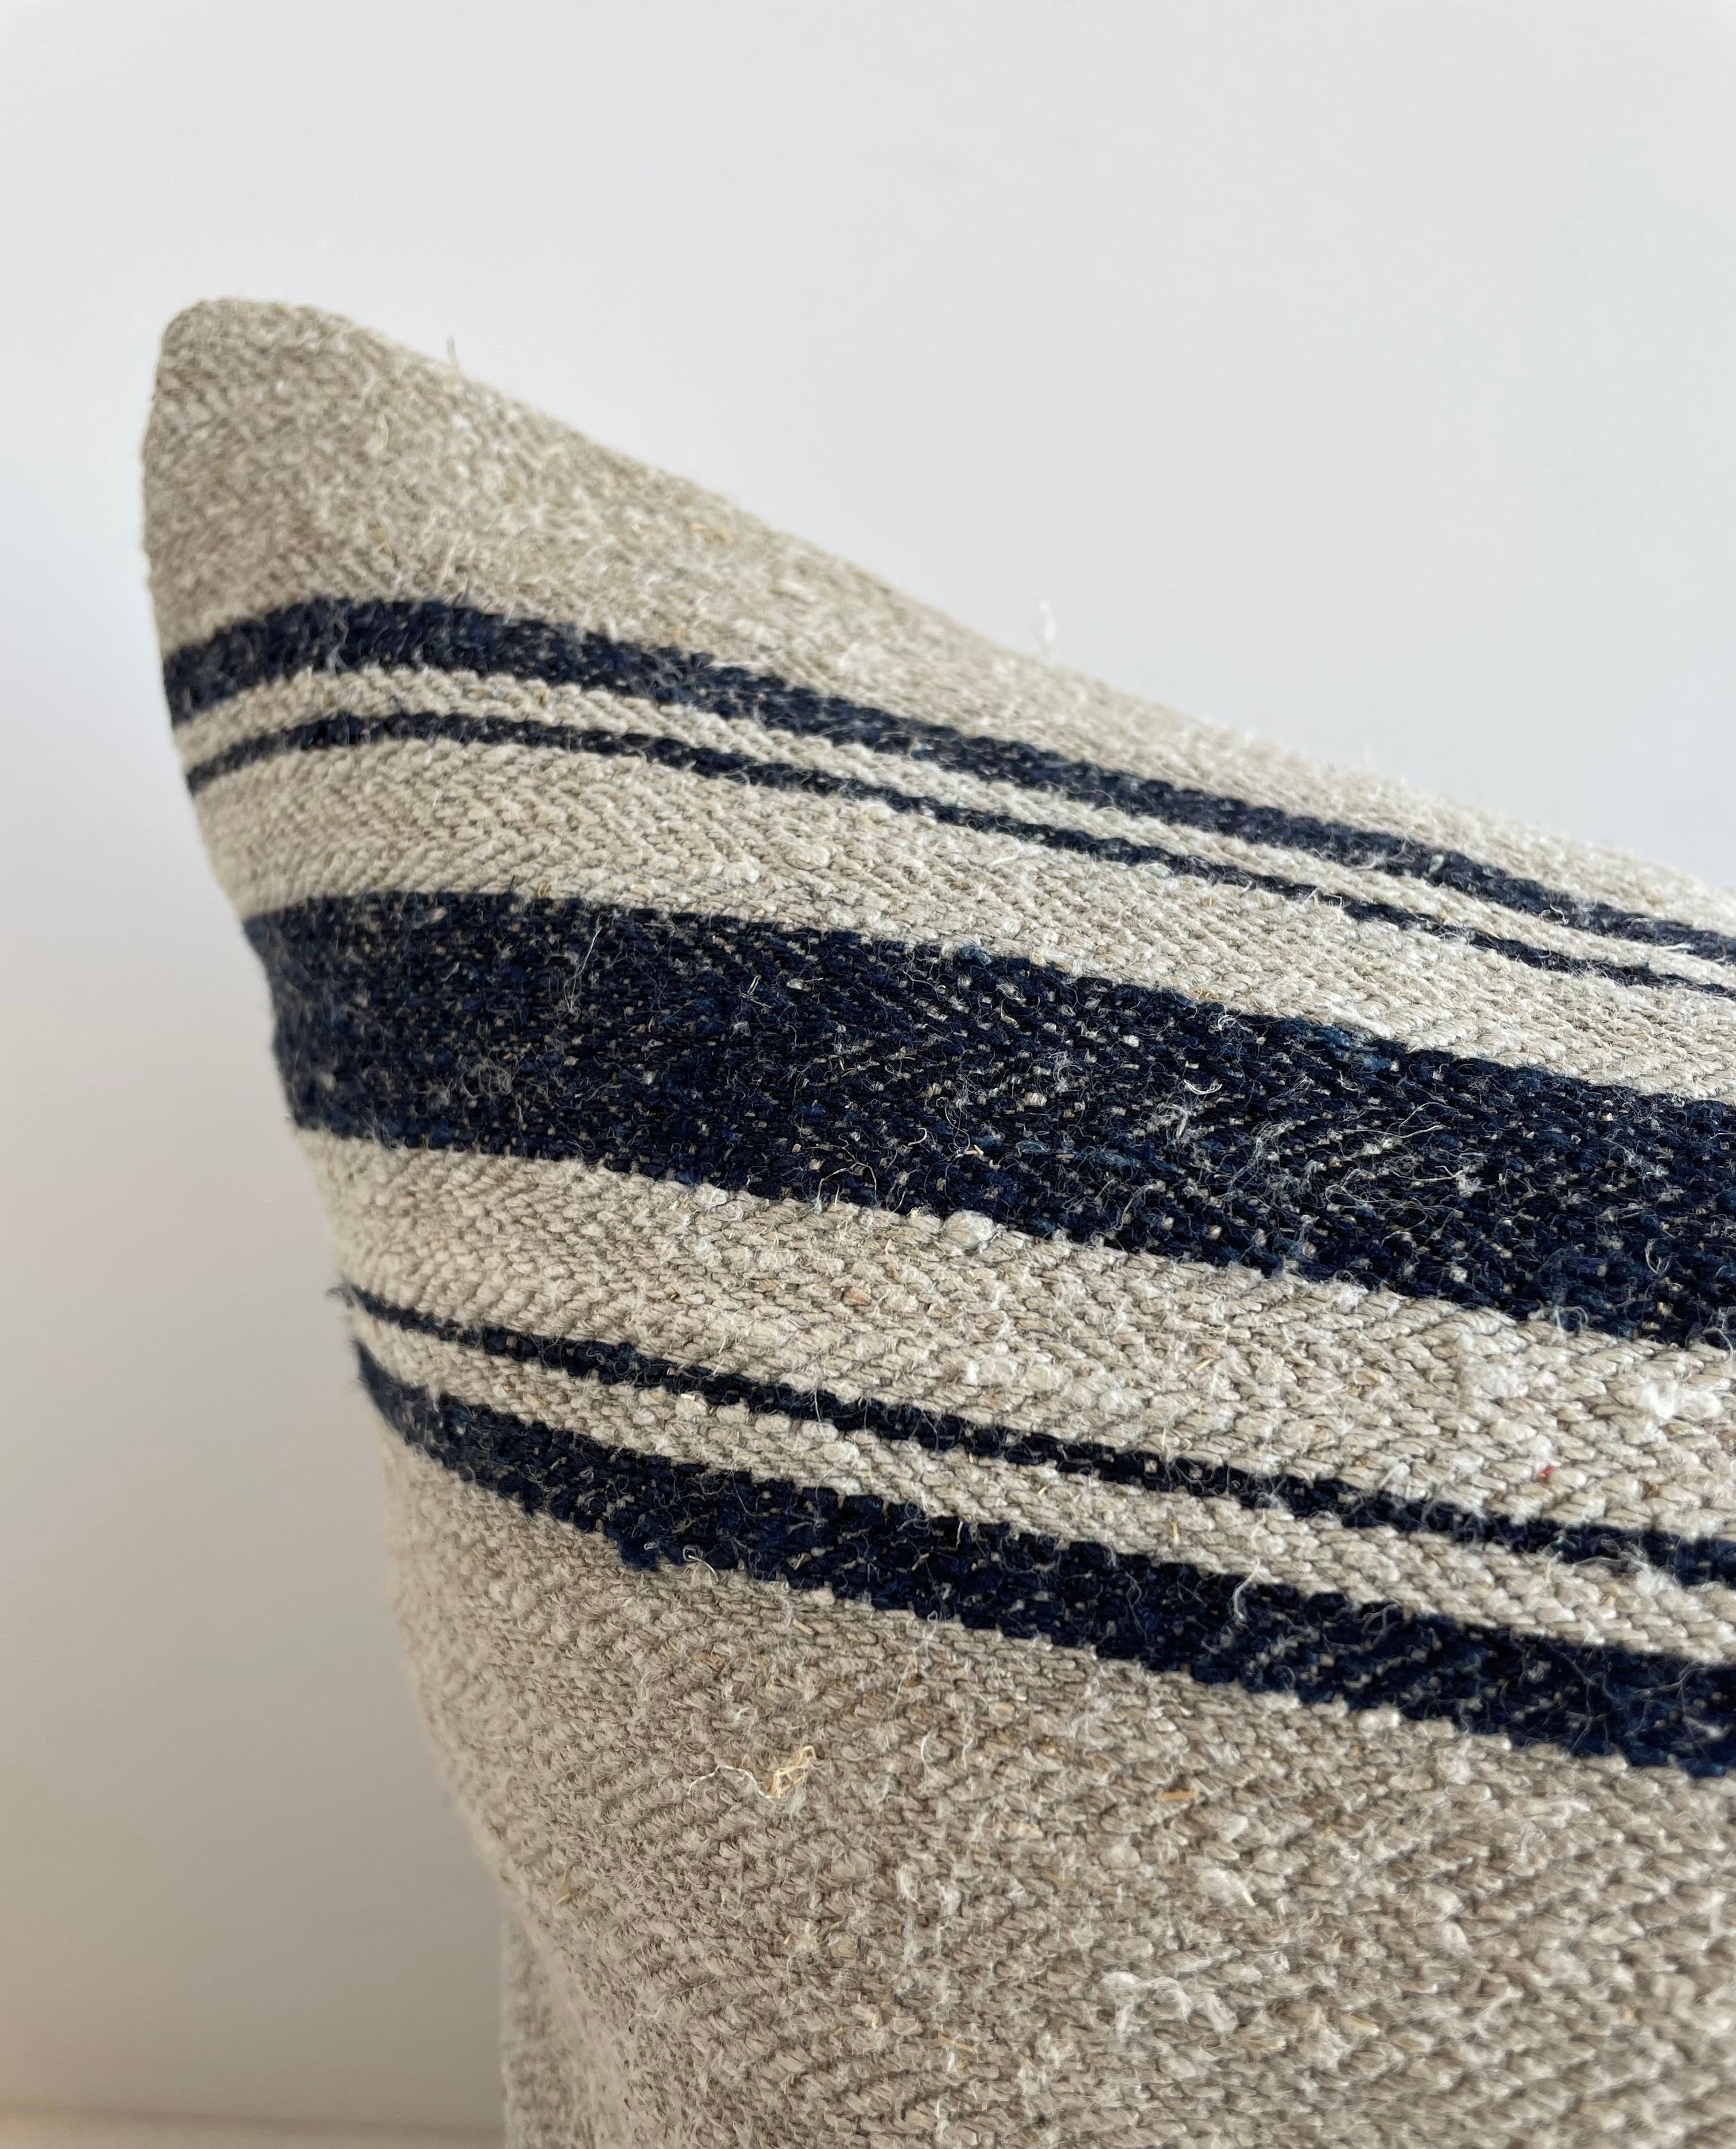 Grainsack pillows
Lovely grain feed sack pillows from Europe. We custom-made these out of the original antique feed sacks, with brass zipper closure and overlocked edges. The fronts are original woven linen and hemp with stripes in indigo and off